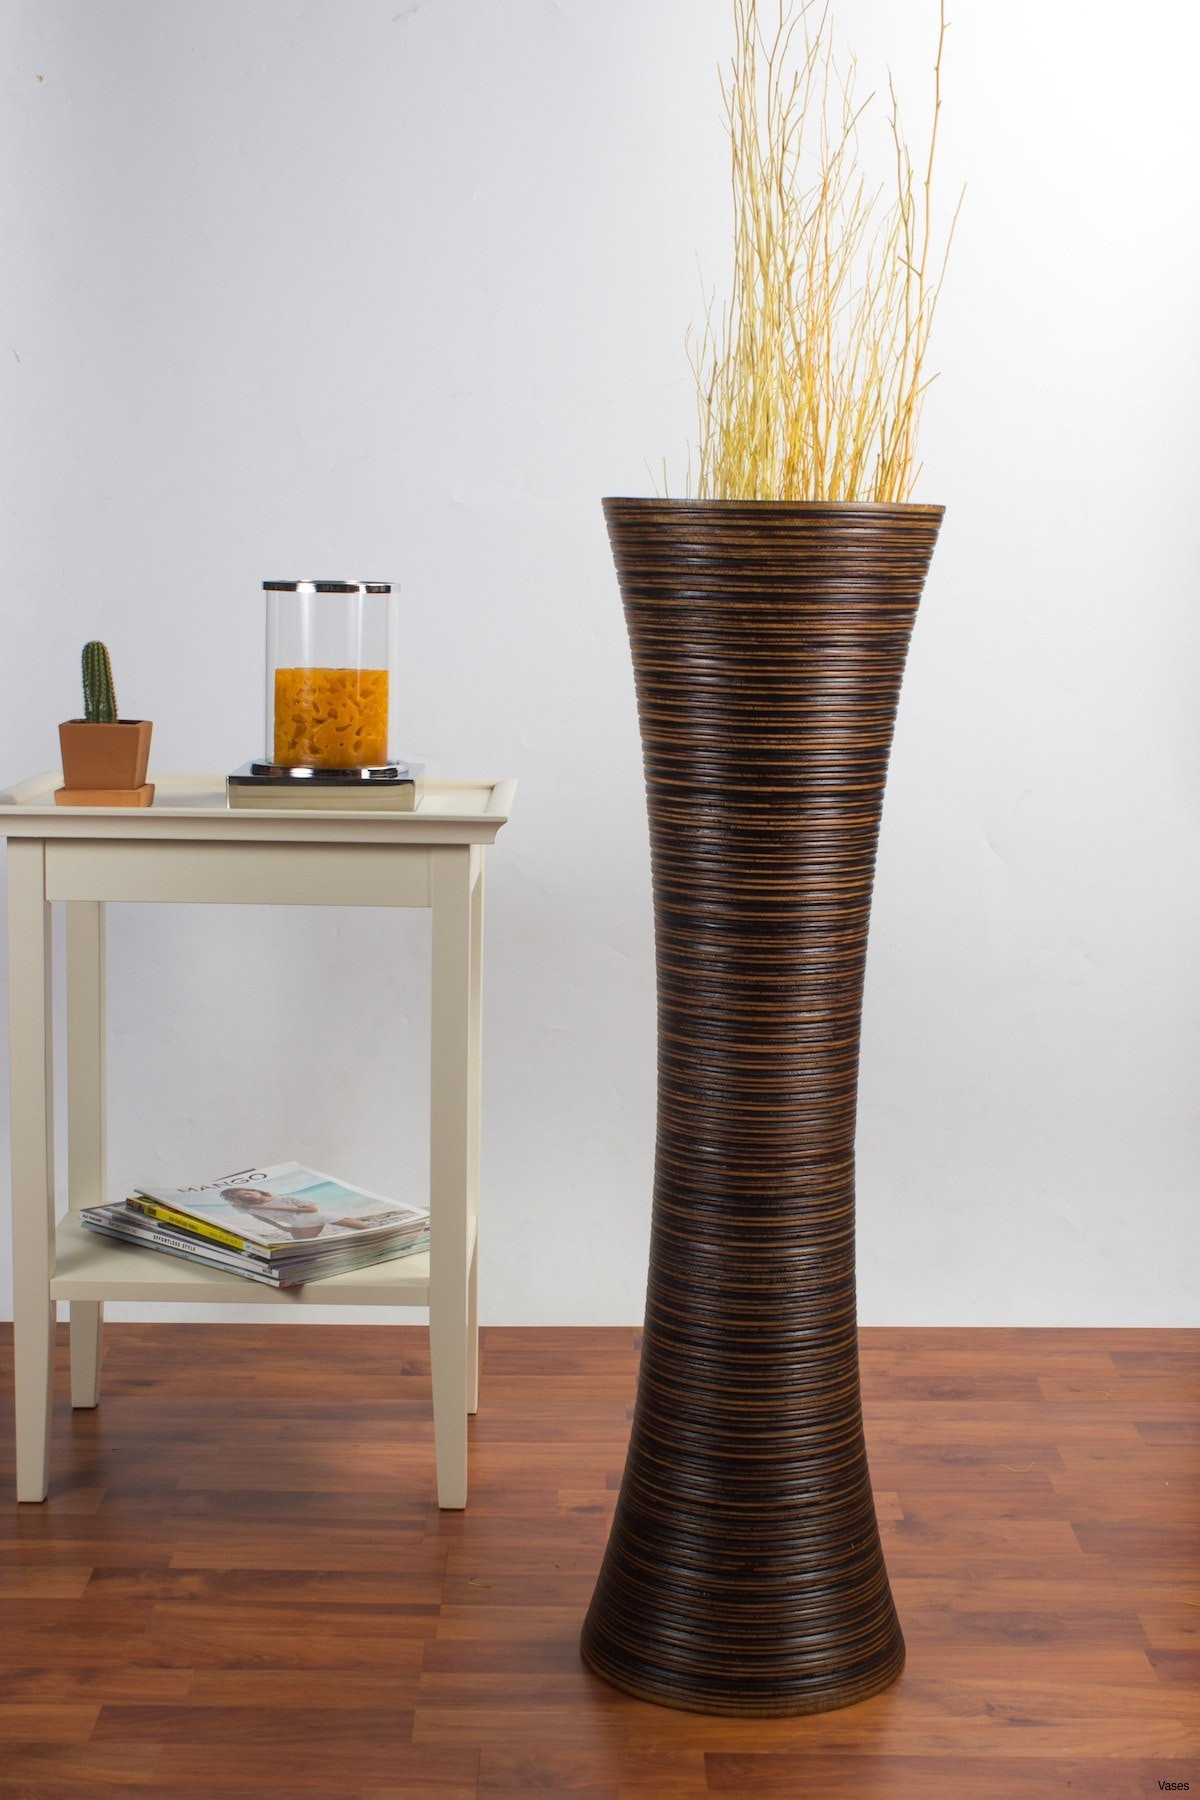 18 Unique Tall Rustic Vase 2024 free download tall rustic vase of tall wooden vase collection 37 beautiful tall rustic vase vases inside tall wooden vase pics decorative floor vases fresh d dkbrw 5749 1h vases tall brown i